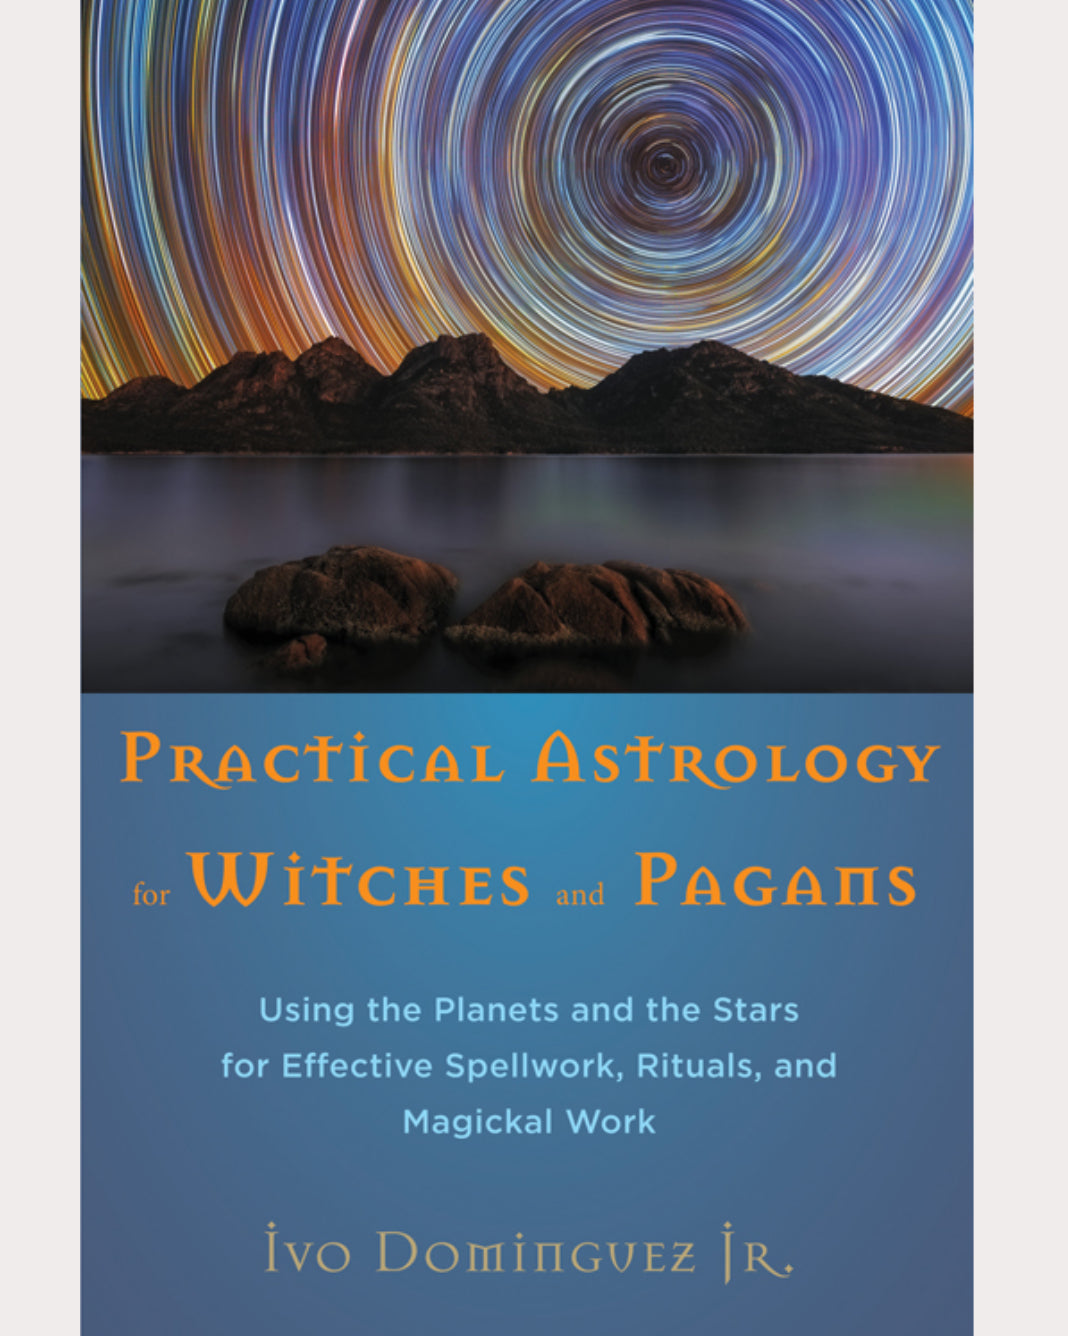 Practical Astrology for Witches & Pagans